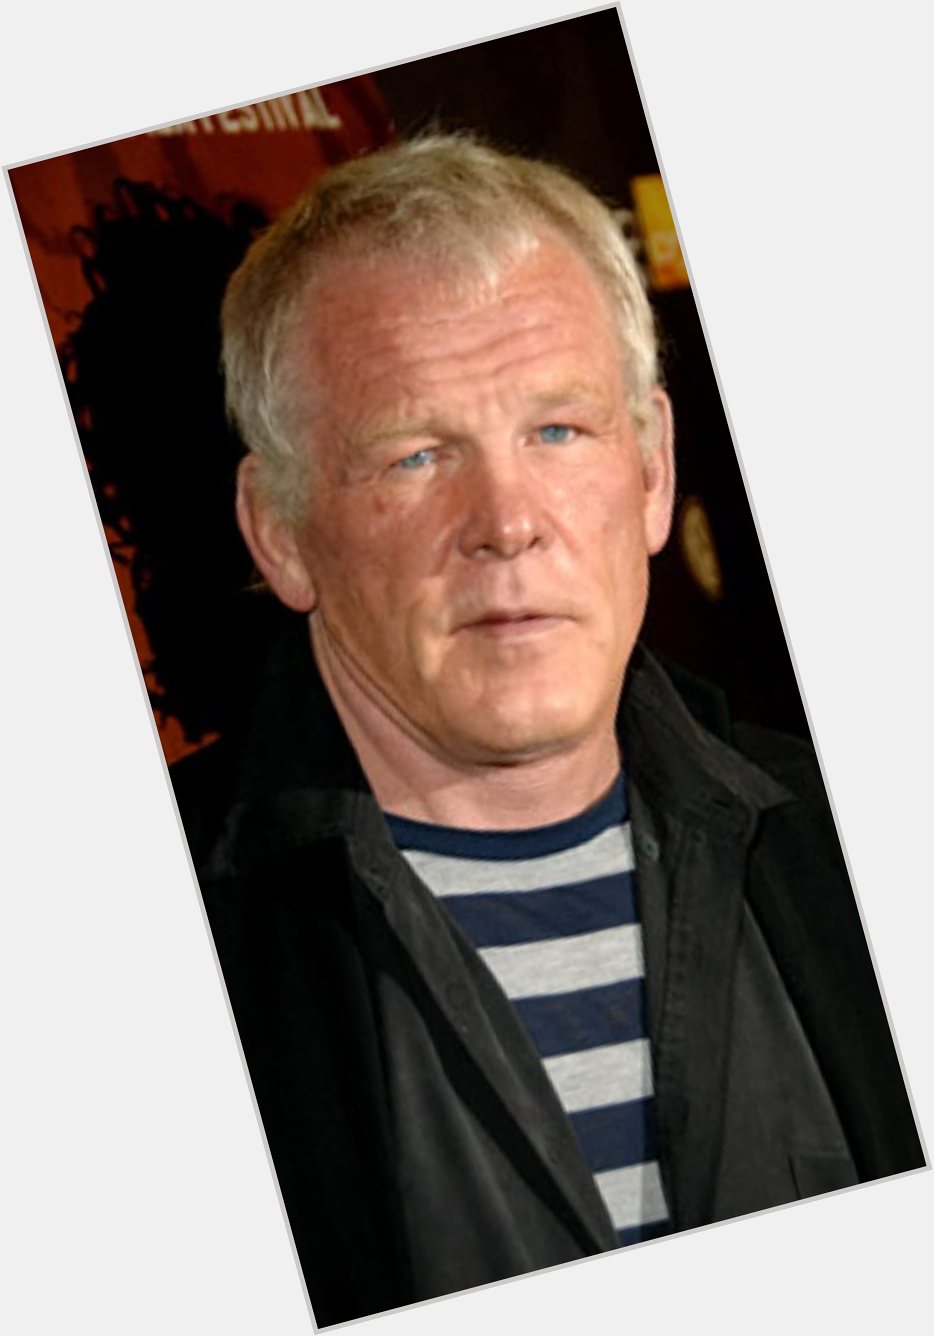 I know I\m 4 days late on this, but happy 80th birthday to Nick Nolte! 